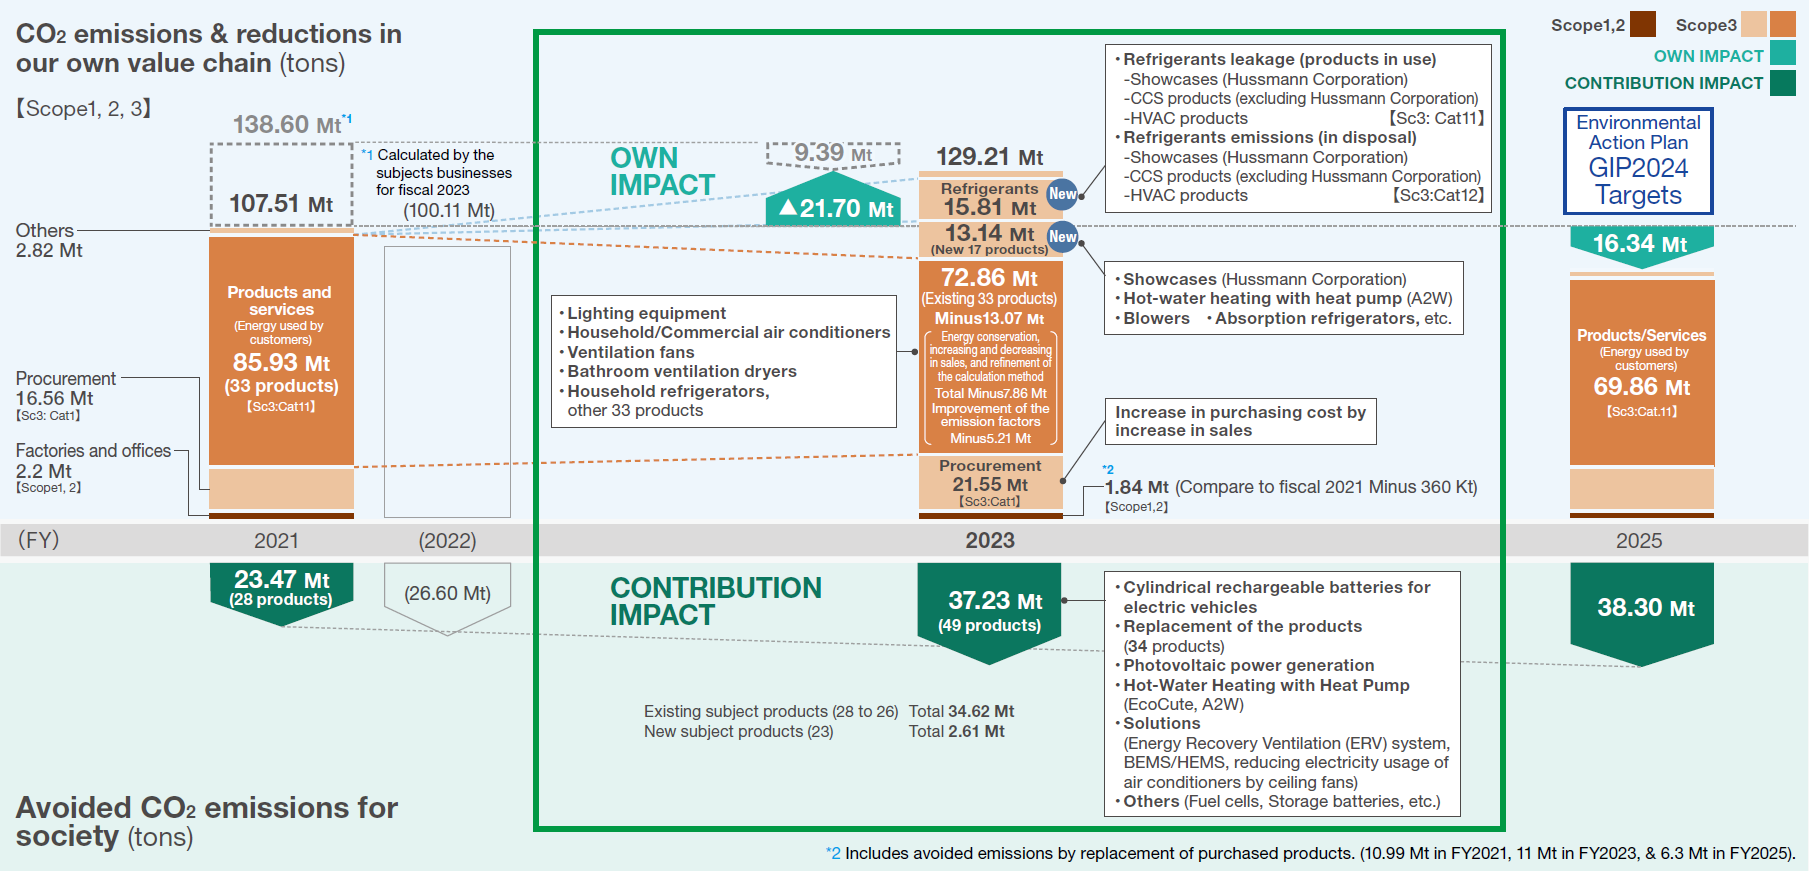 GREEN IMPACT PLAN2024 (GIP2024) Points of change in fiscal 2023